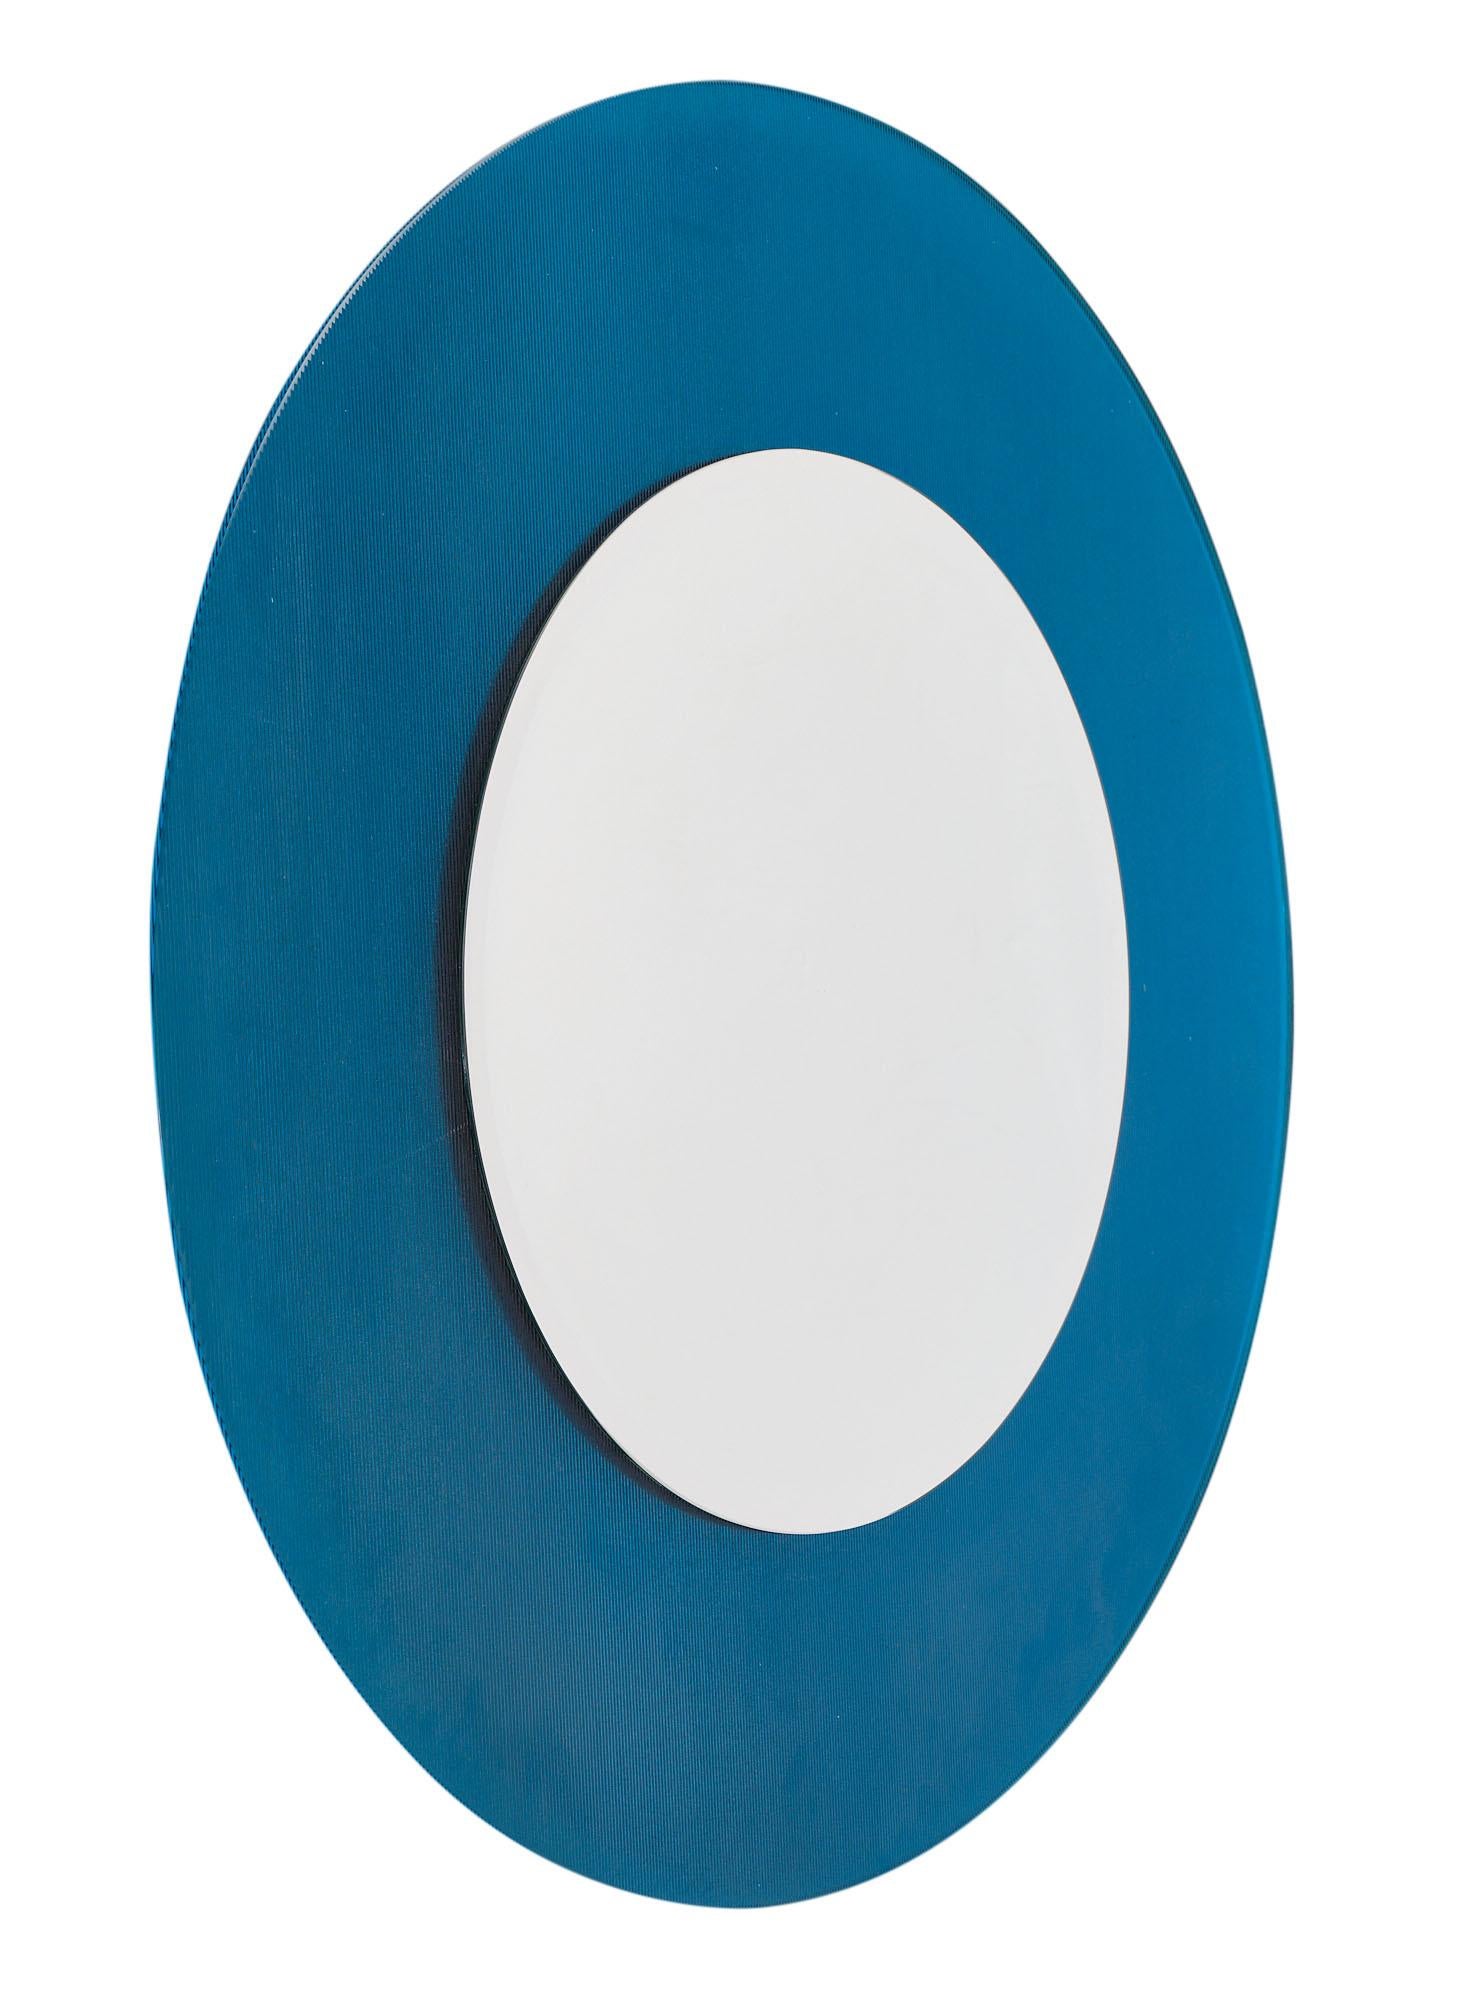 Large French modernist round mirror with striking blue glass frame surrounding a beveled mirror.